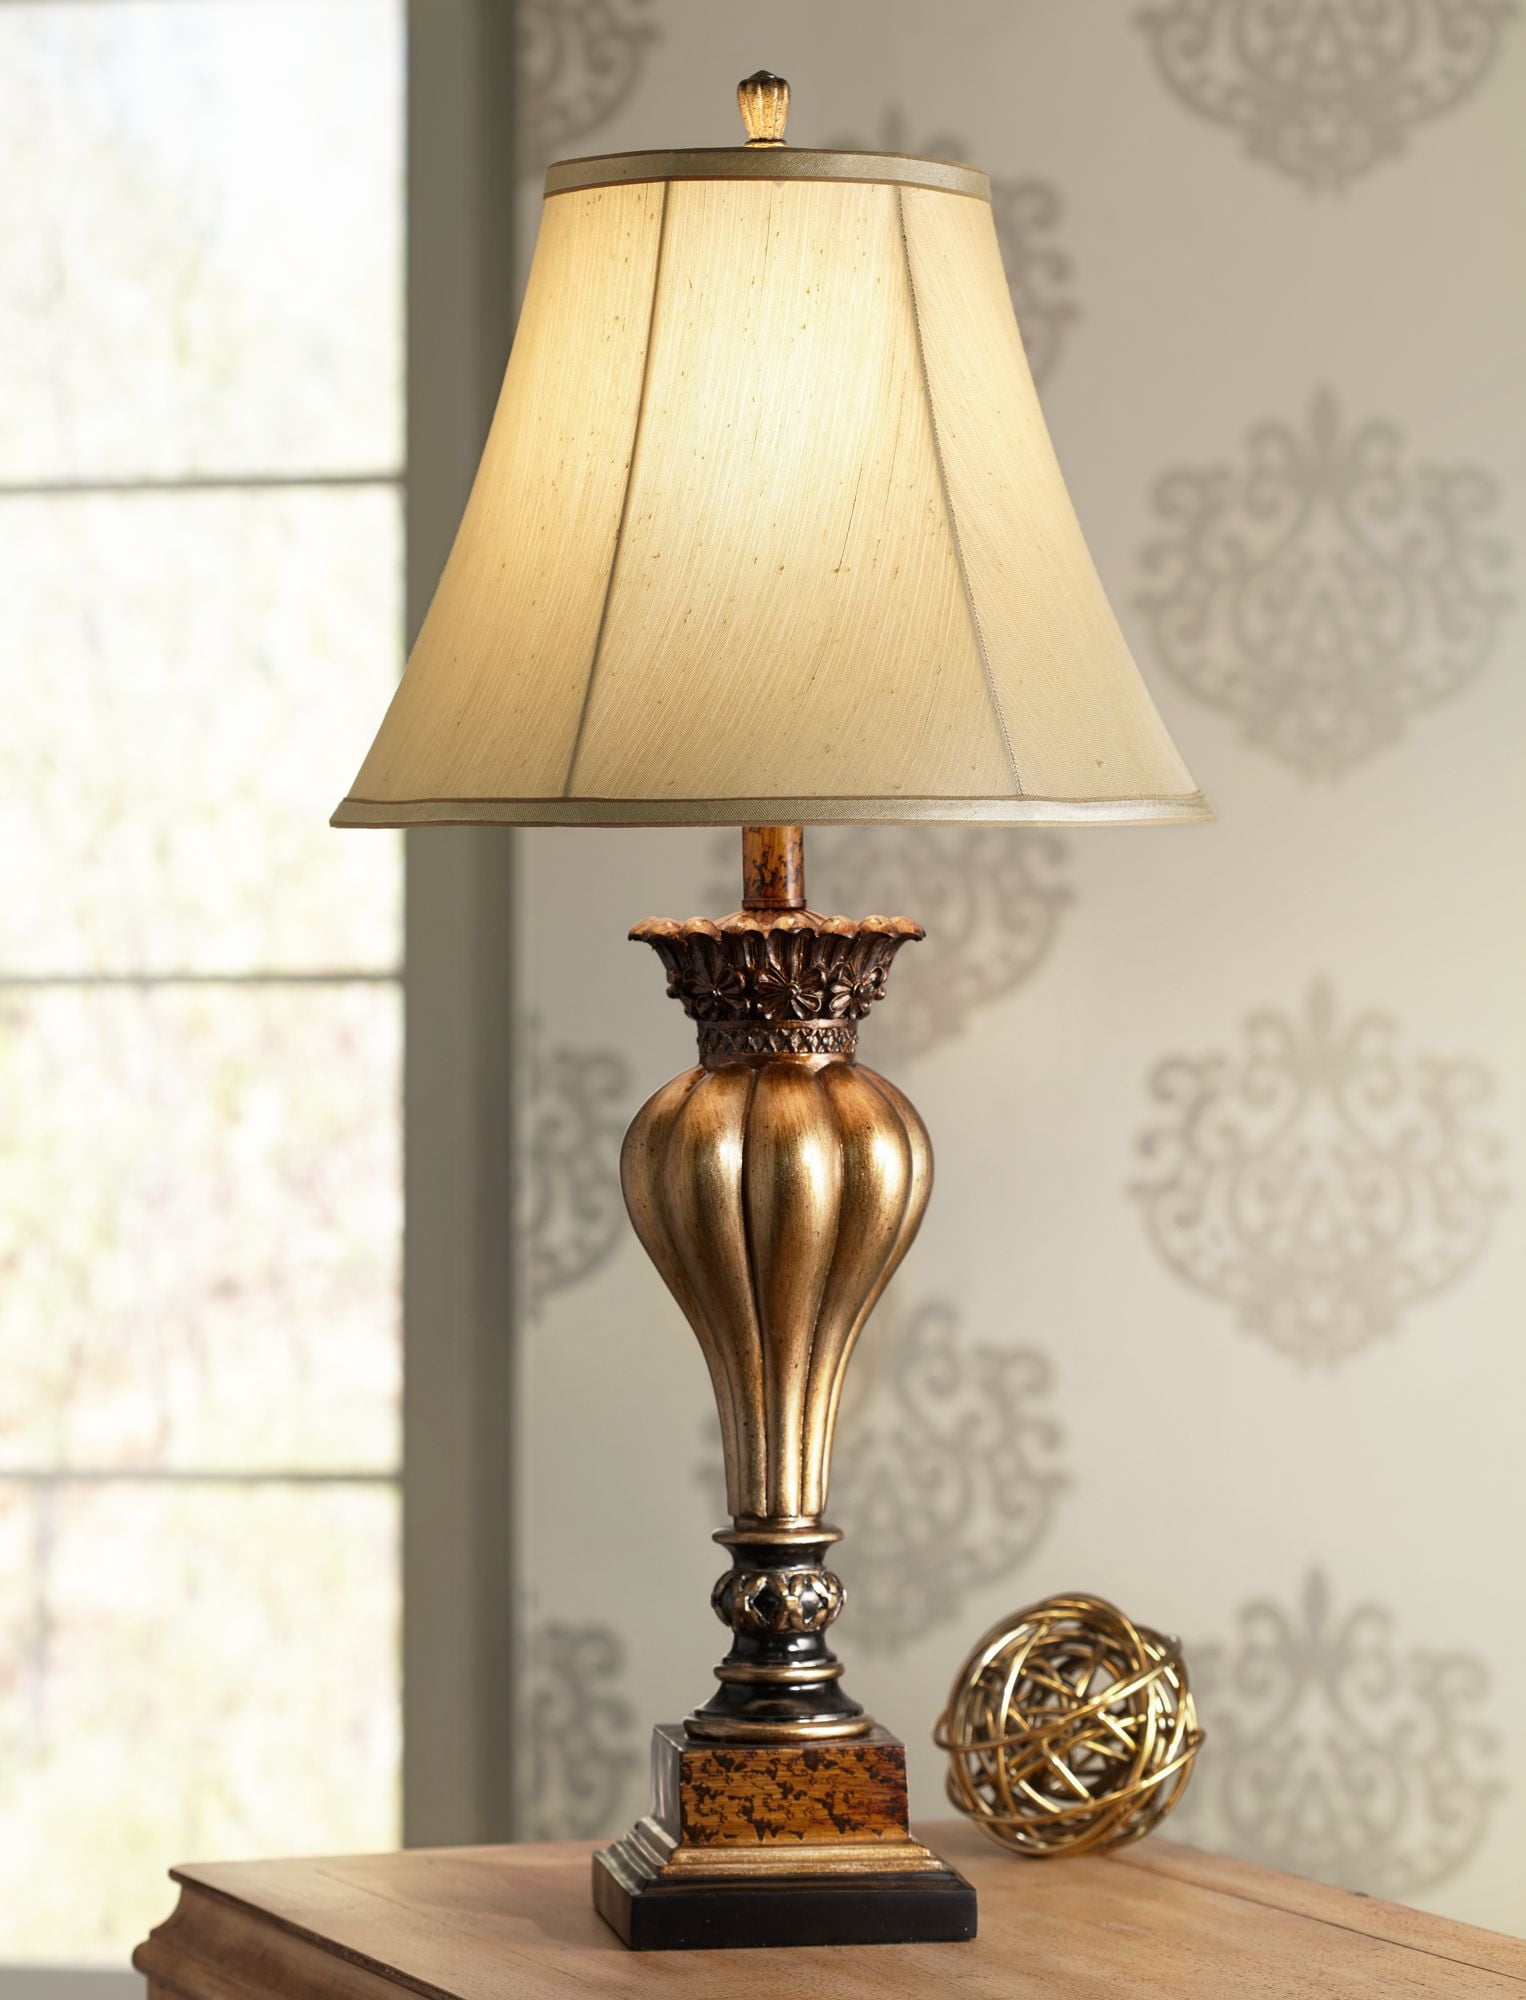 Regency Hill Traditional Table Lamp Vase Silhouette with